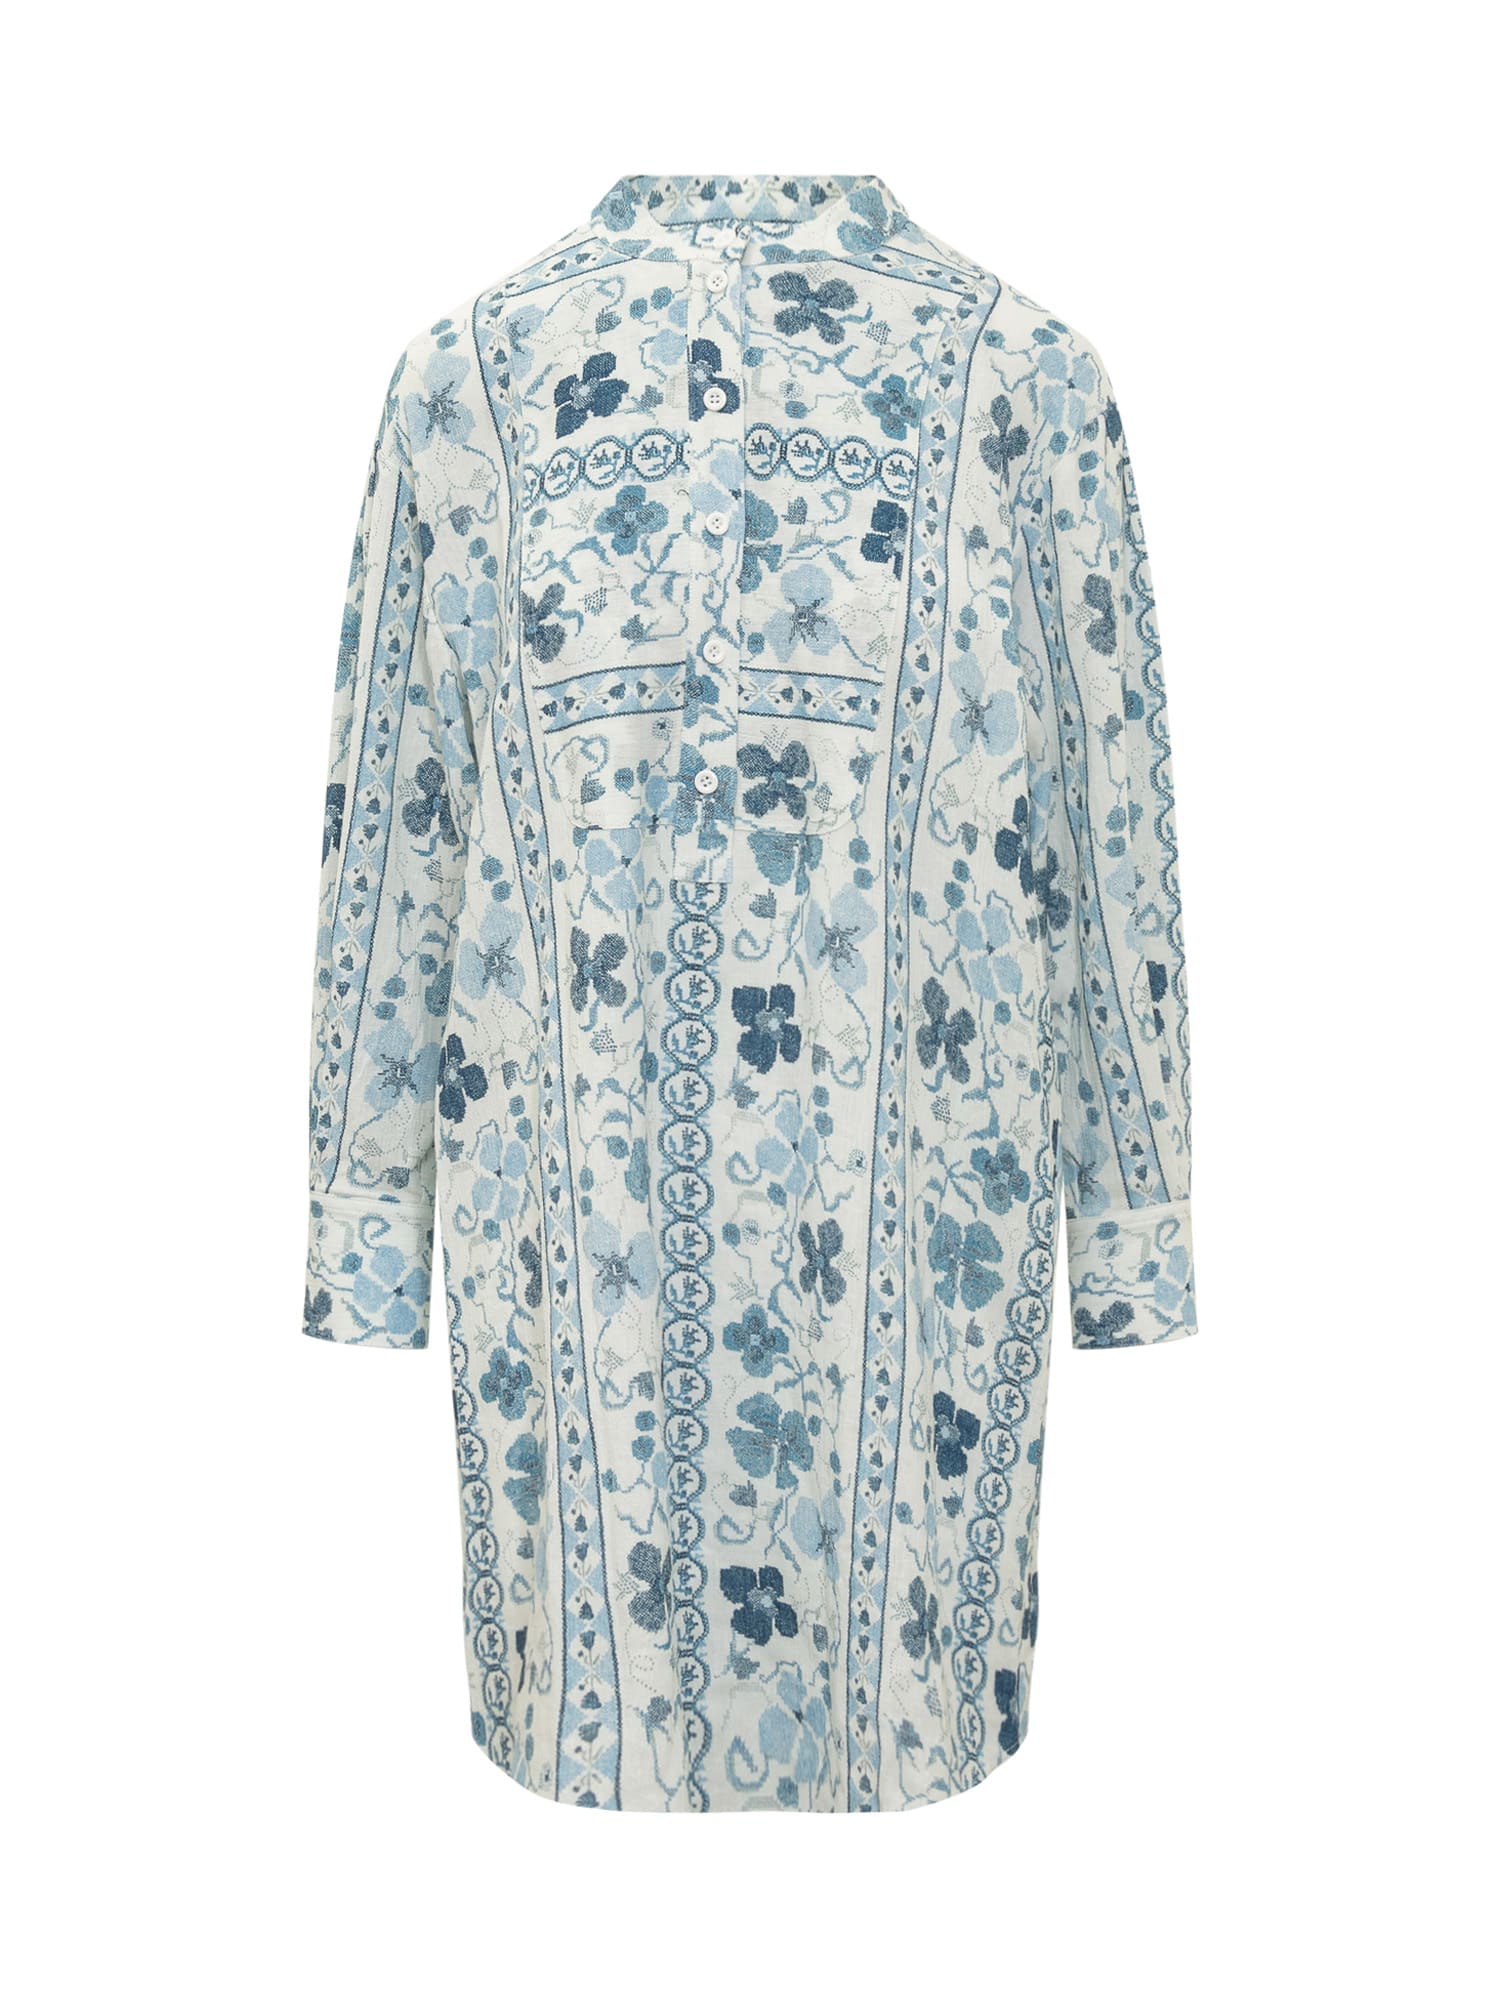 SEE BY CHLOÉ FLORAL DRESS